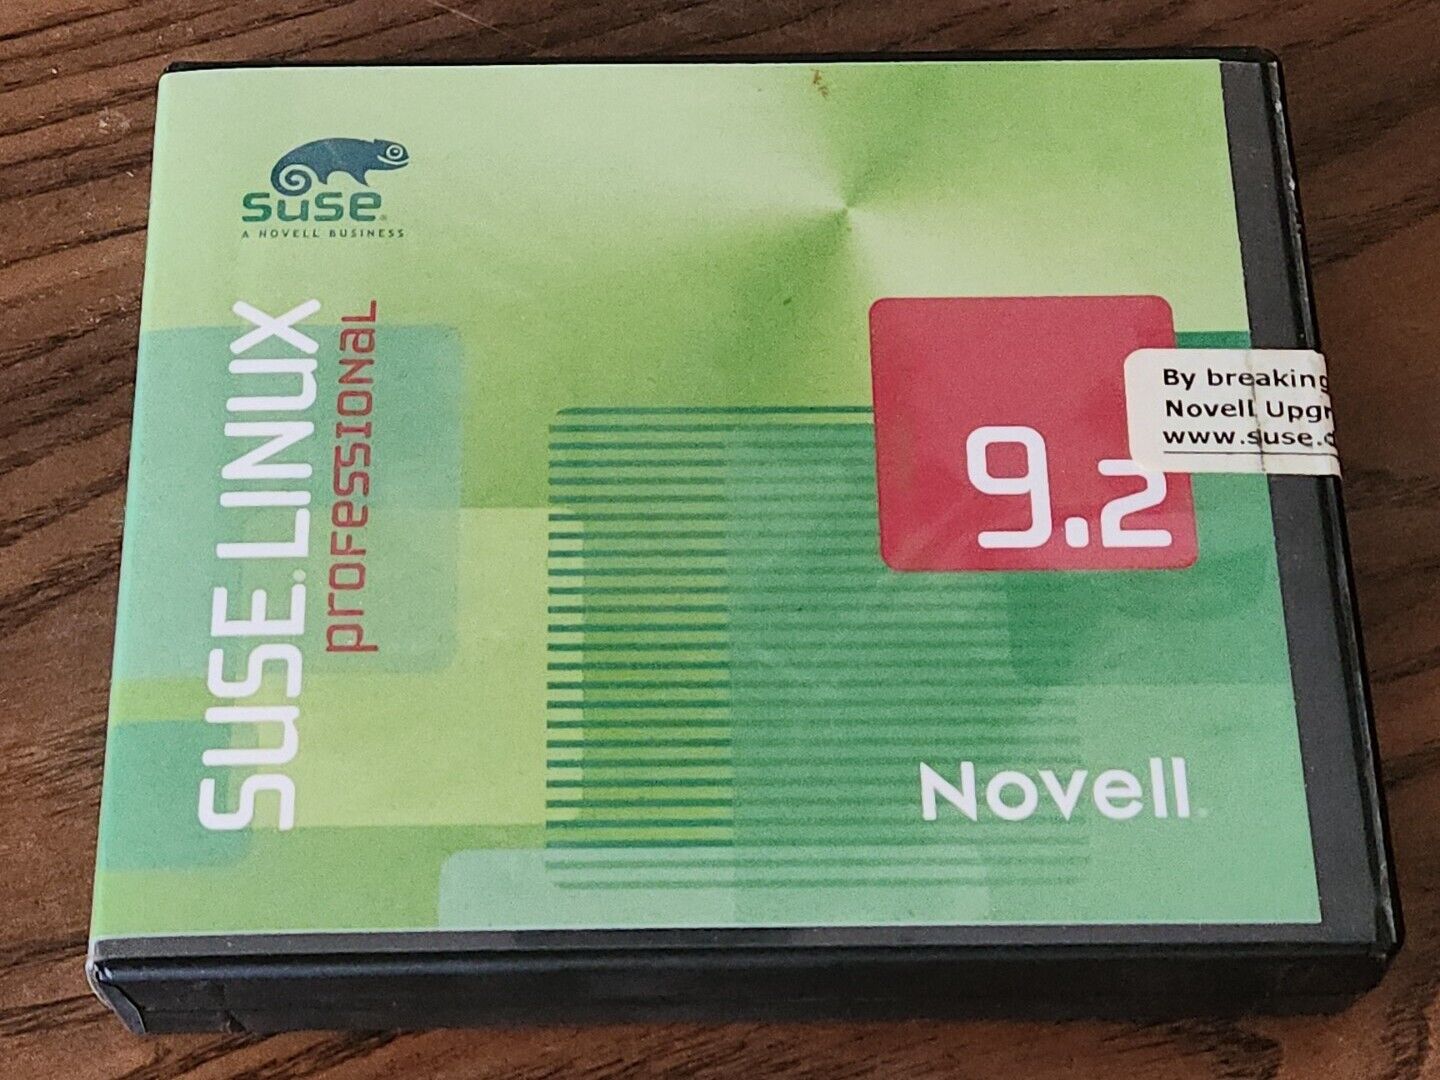 Novell SUSE LINUX Professional 9.2 Operating System Software